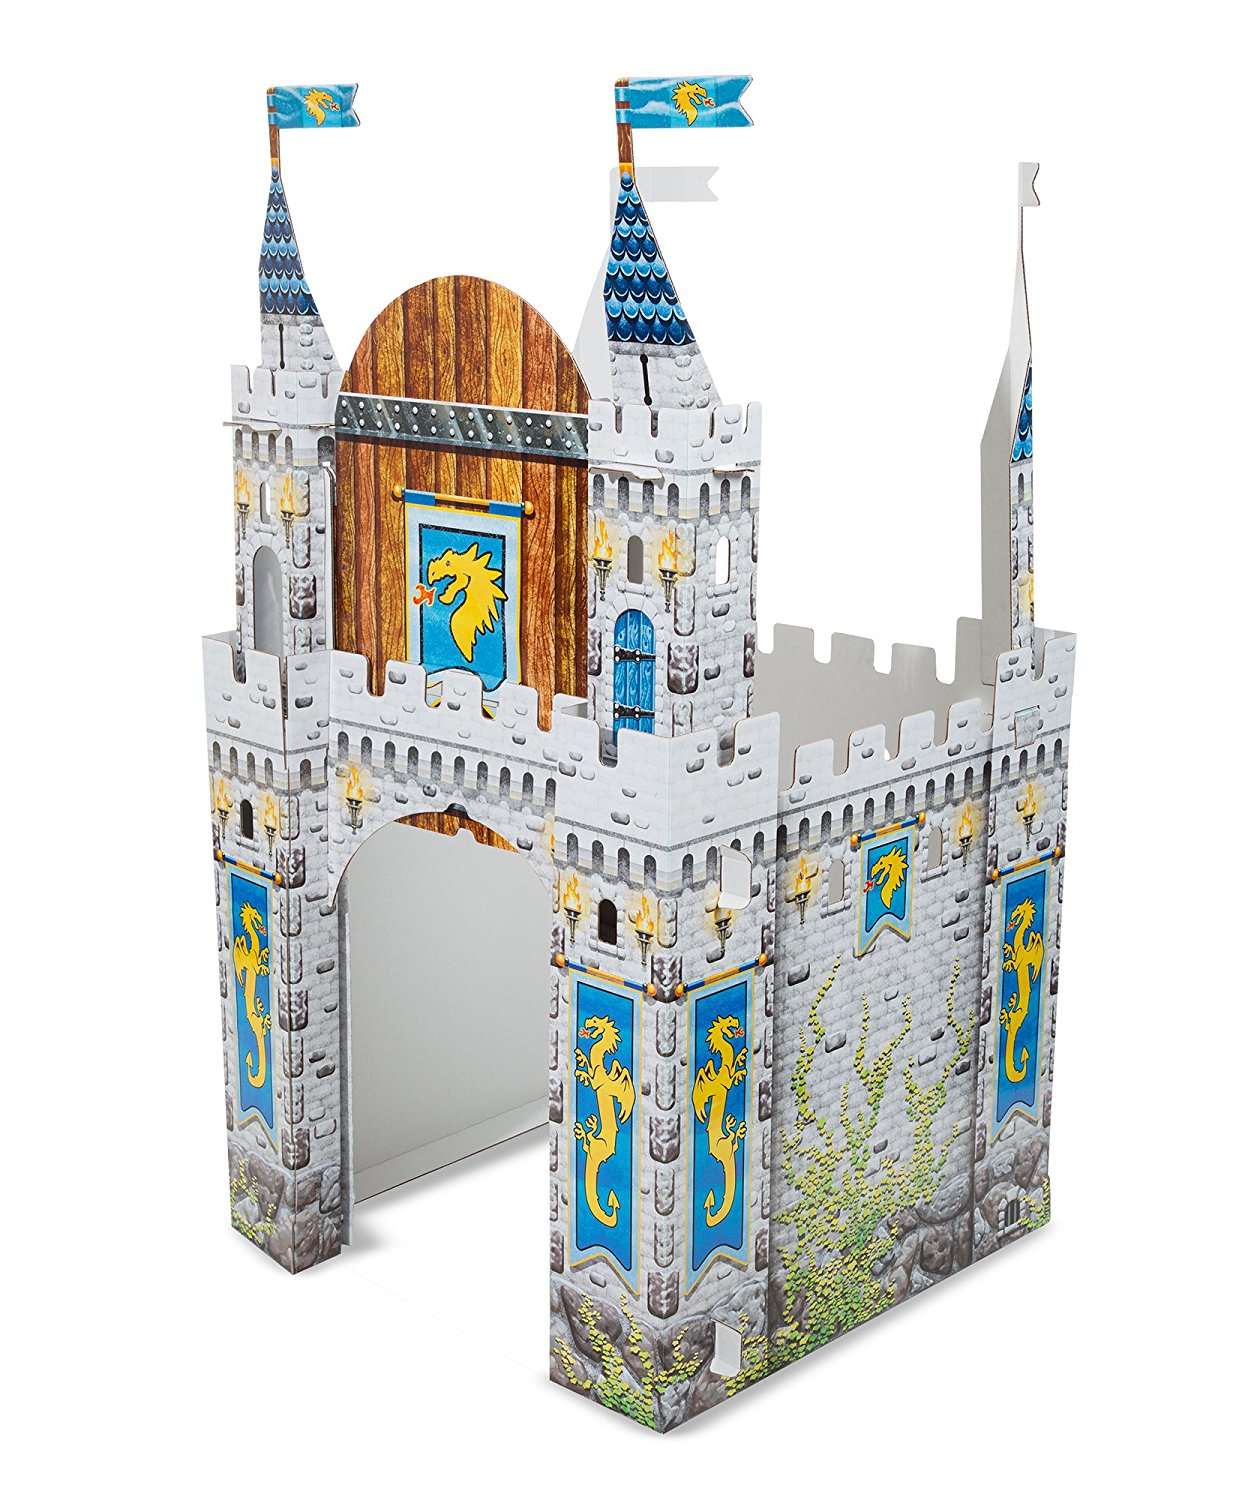 melissa and doug medieval castle indoor playhouse